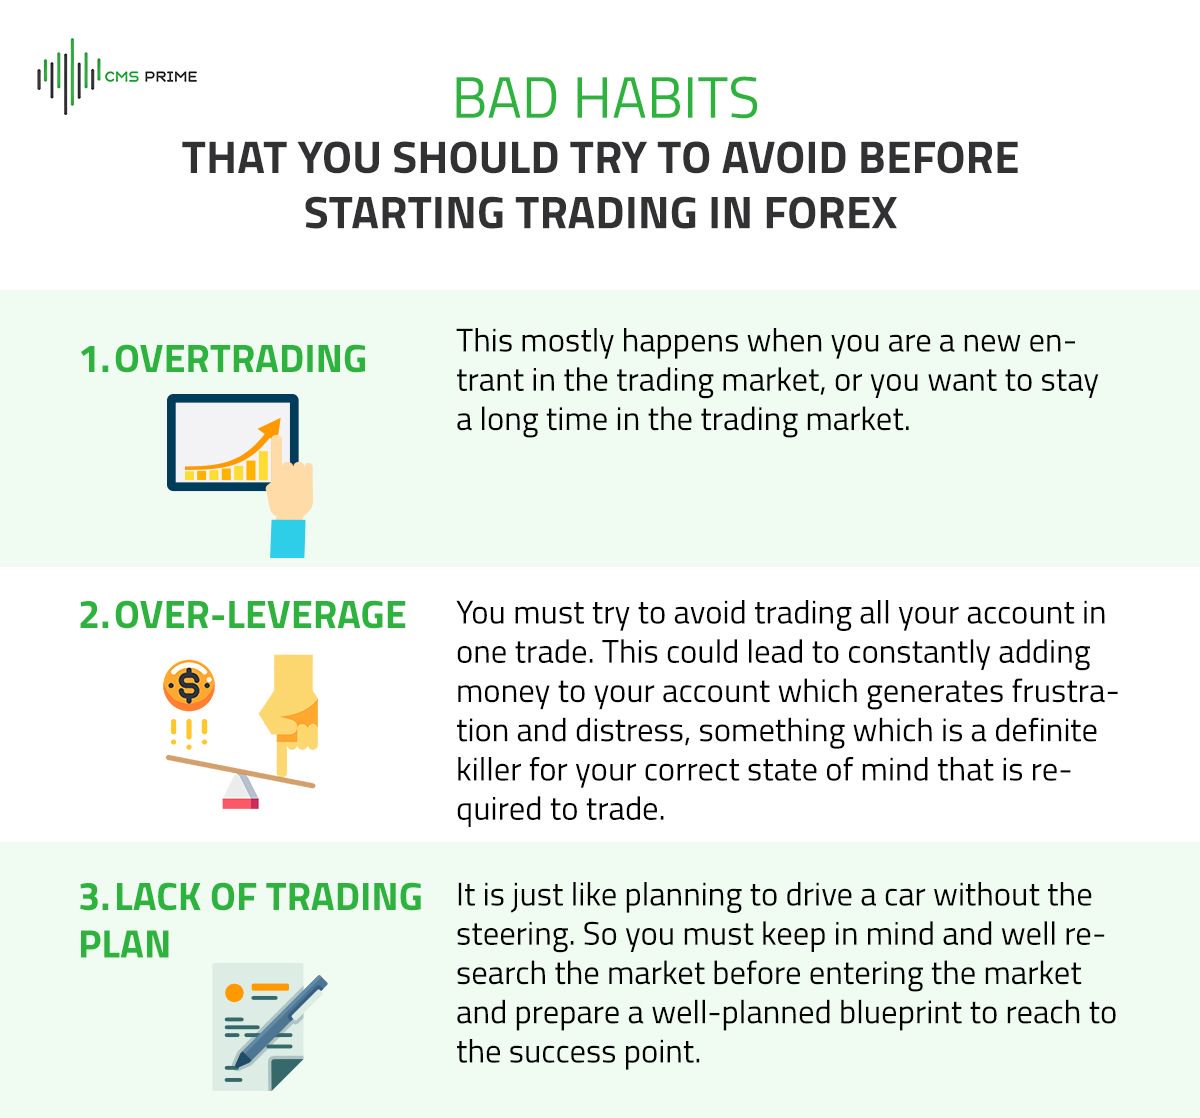 Forex Brokers With Zar Accounts | Forex Robot Reviews 2019